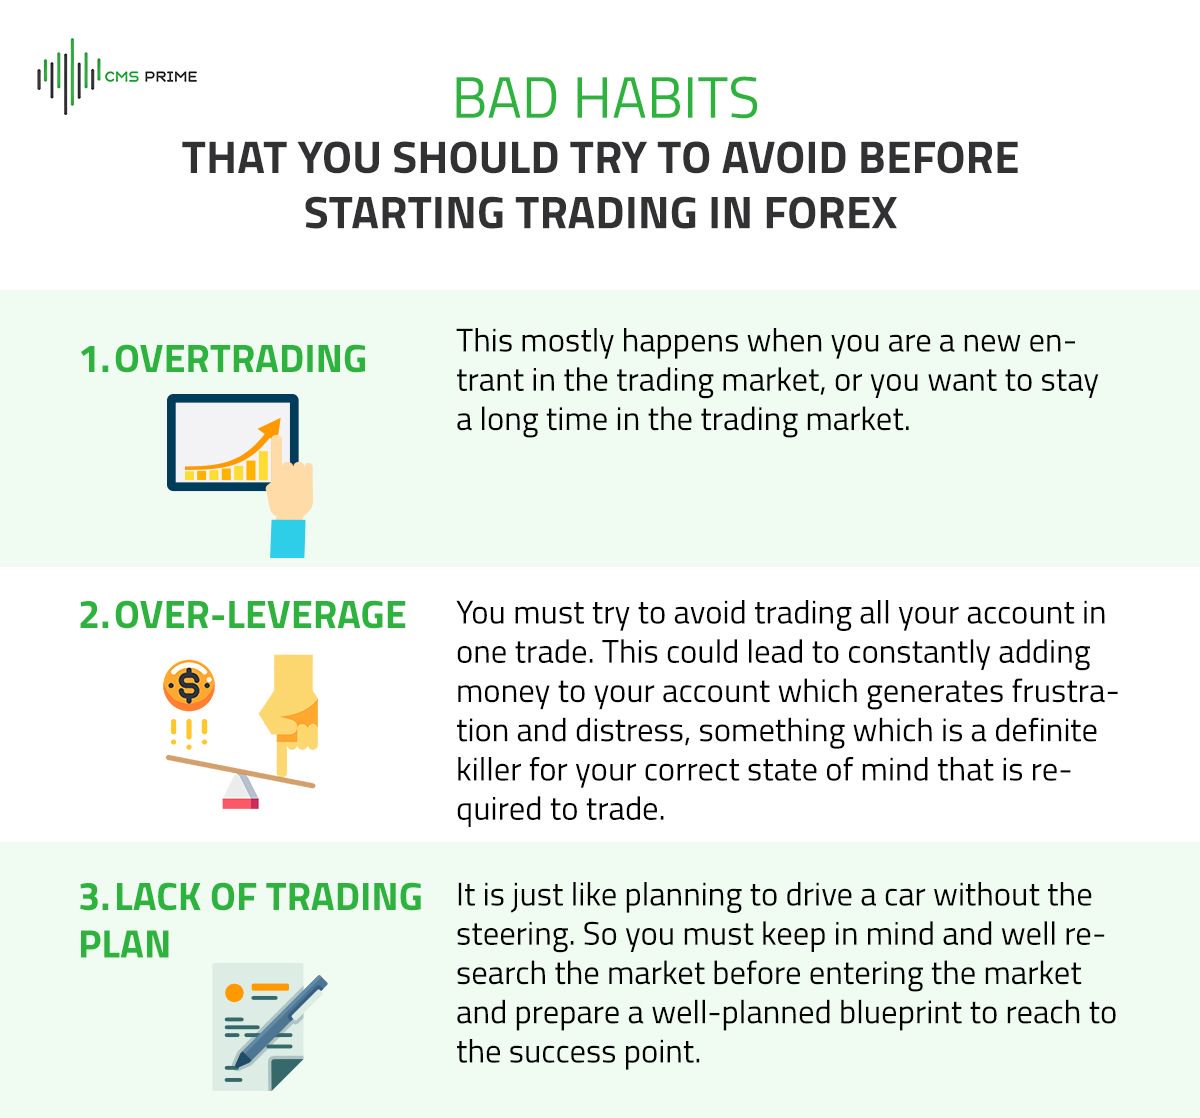 Forex Brokers With Zar Accounts | Forex Robot Reviews 2019